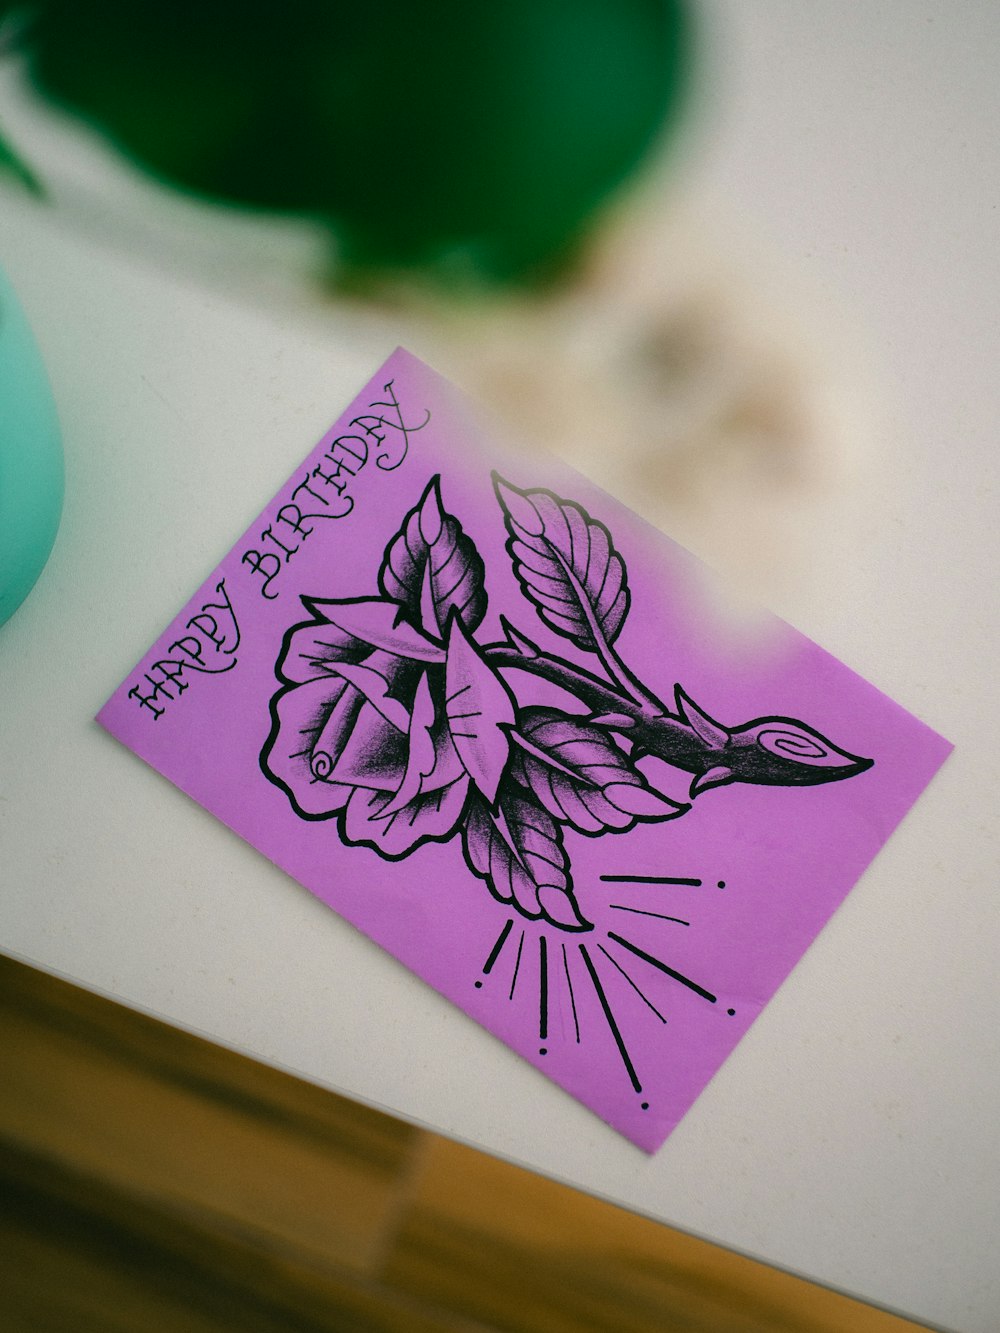 a card with a drawing of a rose on it